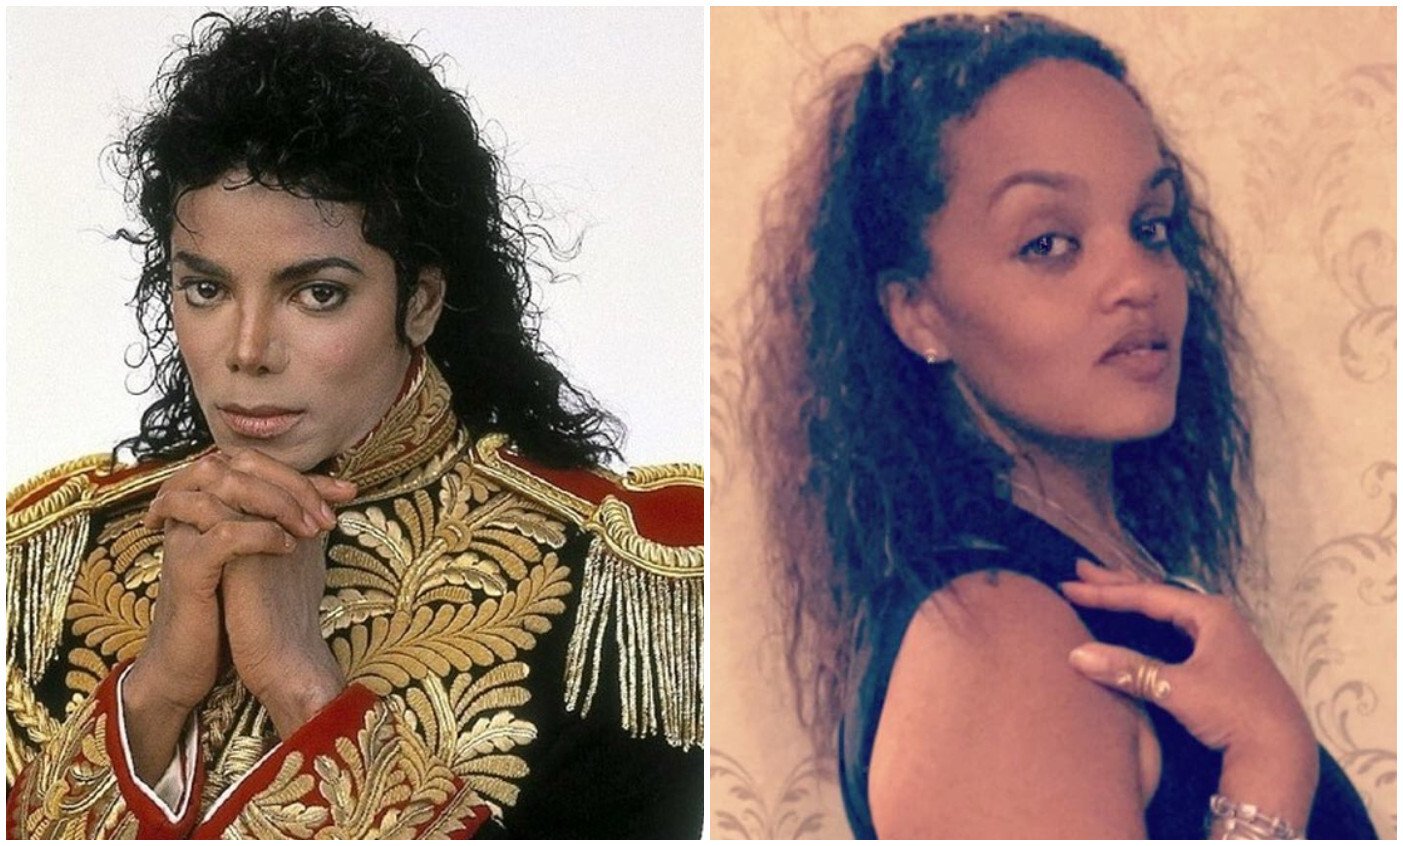 Aside from his other siblings, did you know that Michael Jackson has a secret half-sister? Learn more about Joh’Vonnie Jackson. Photos: @michaeljackson, @johvonniejackson74/Instagram